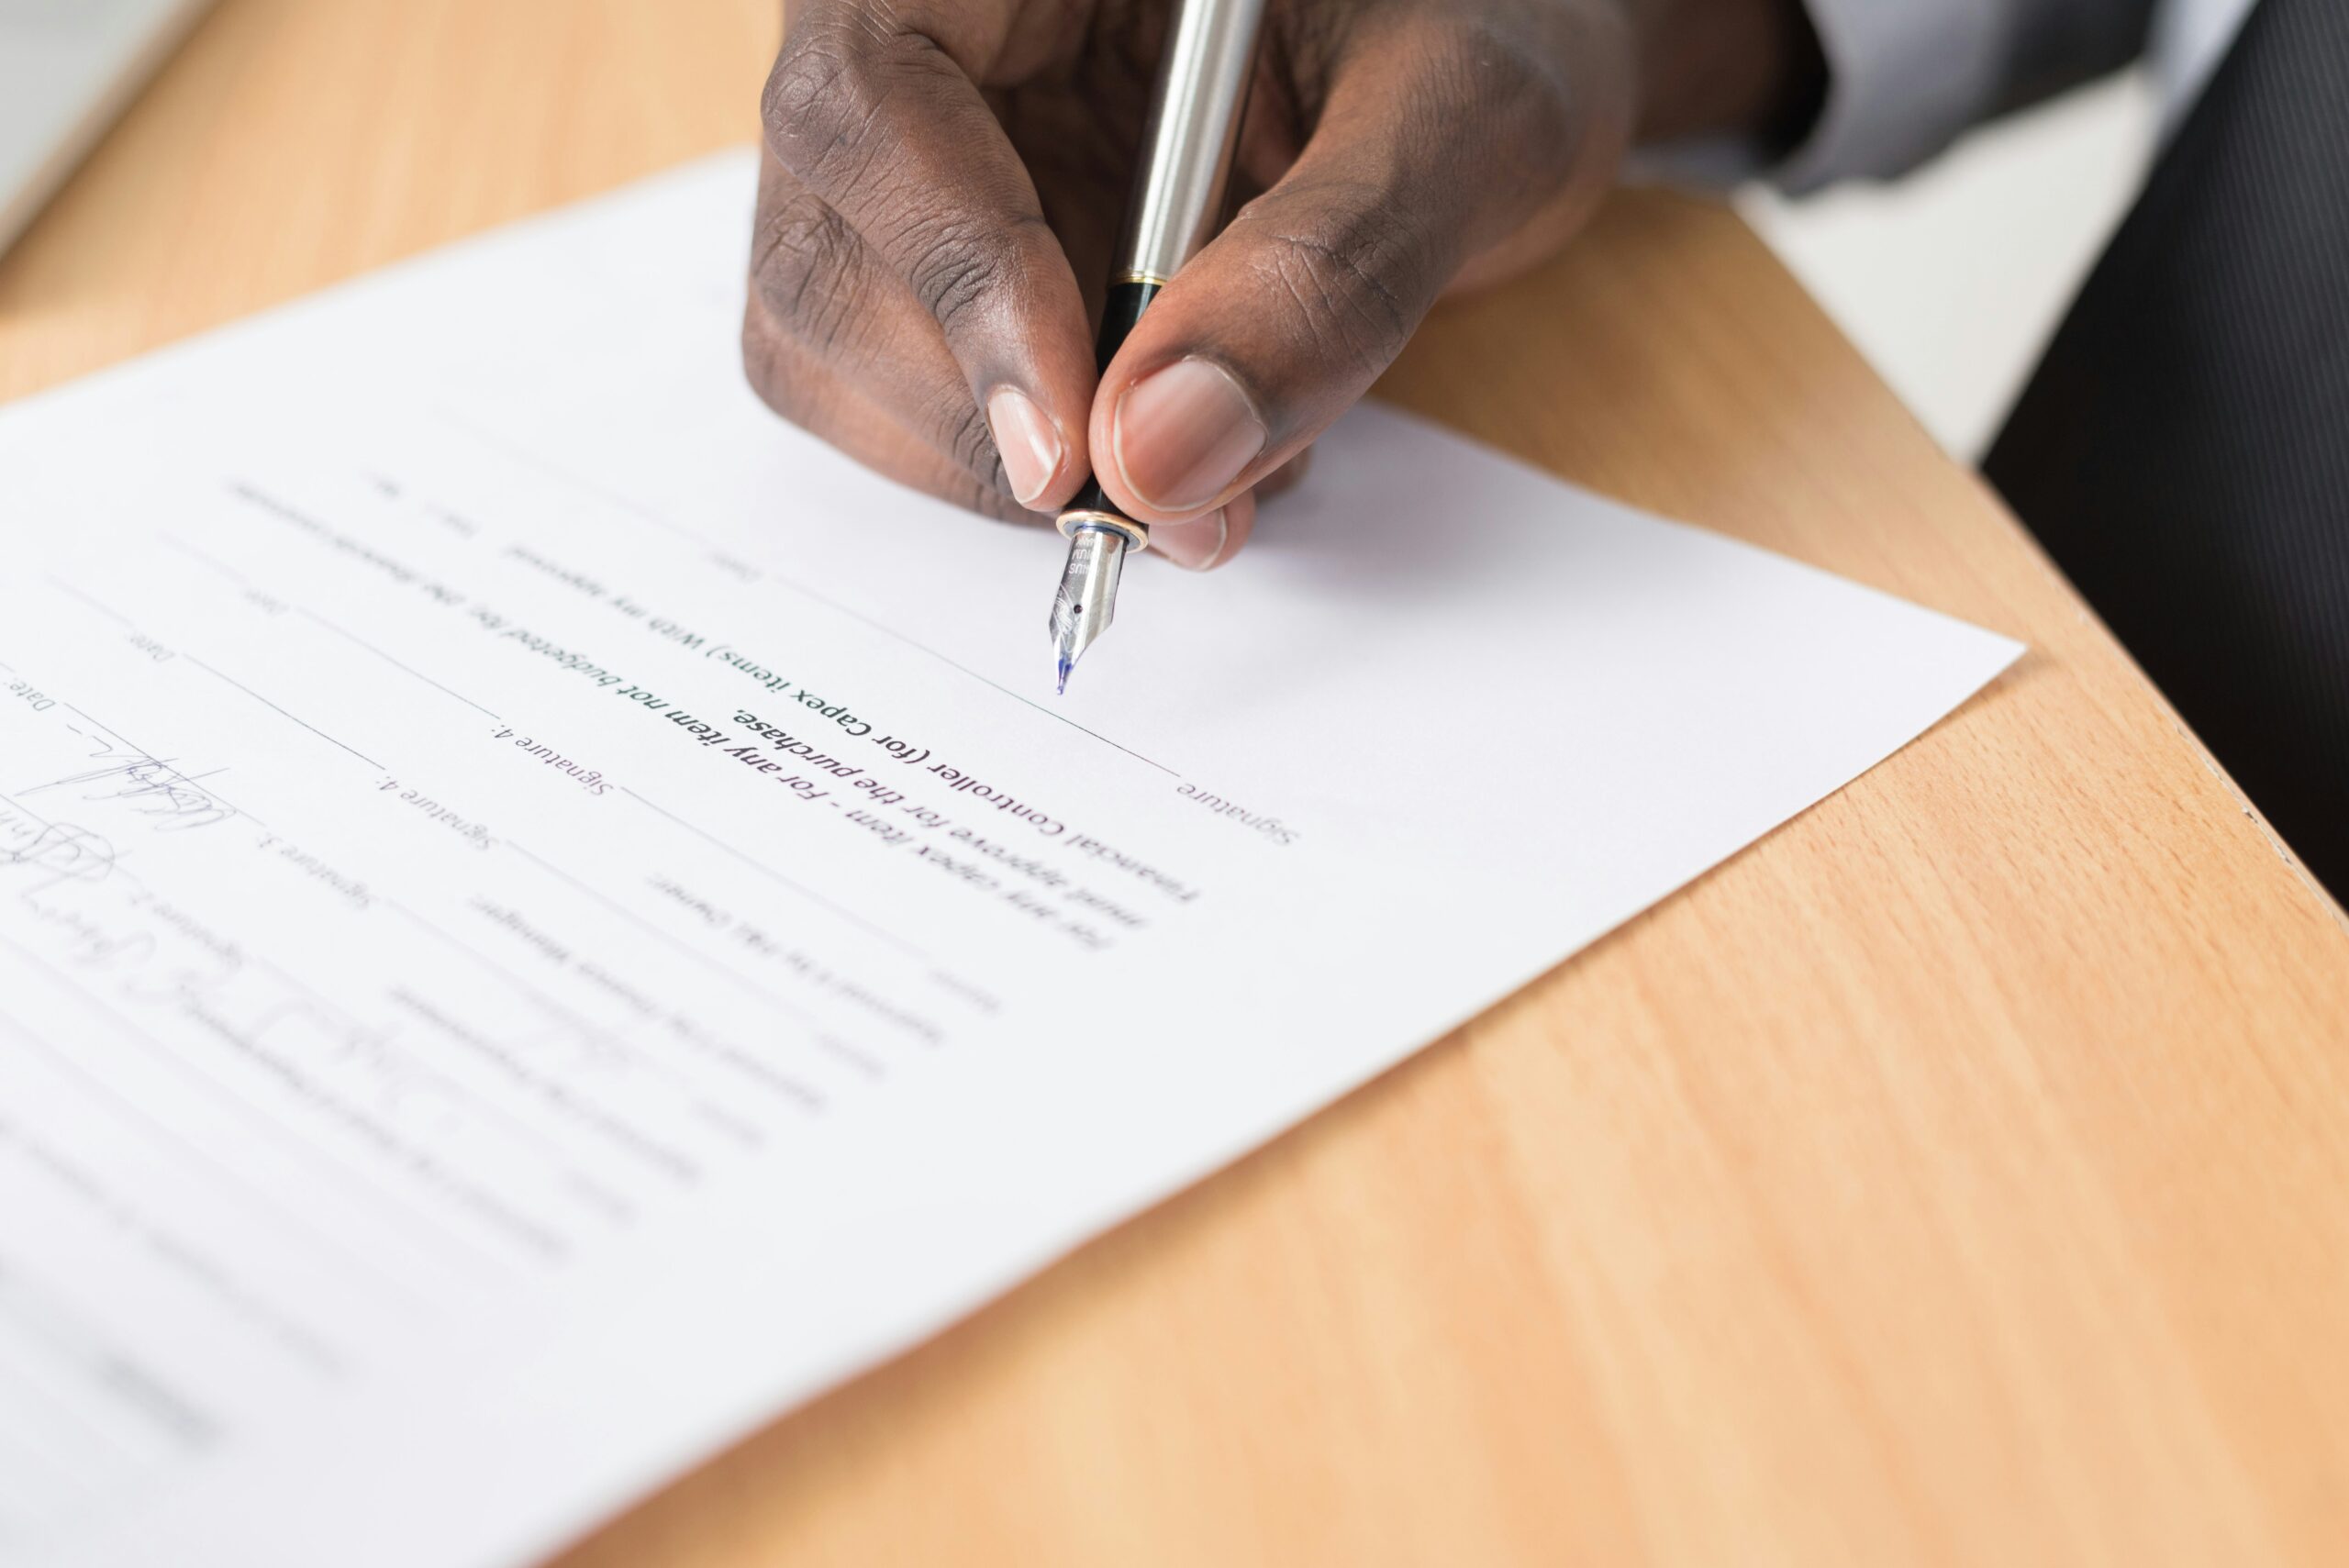 What should you include in an employment agreement?